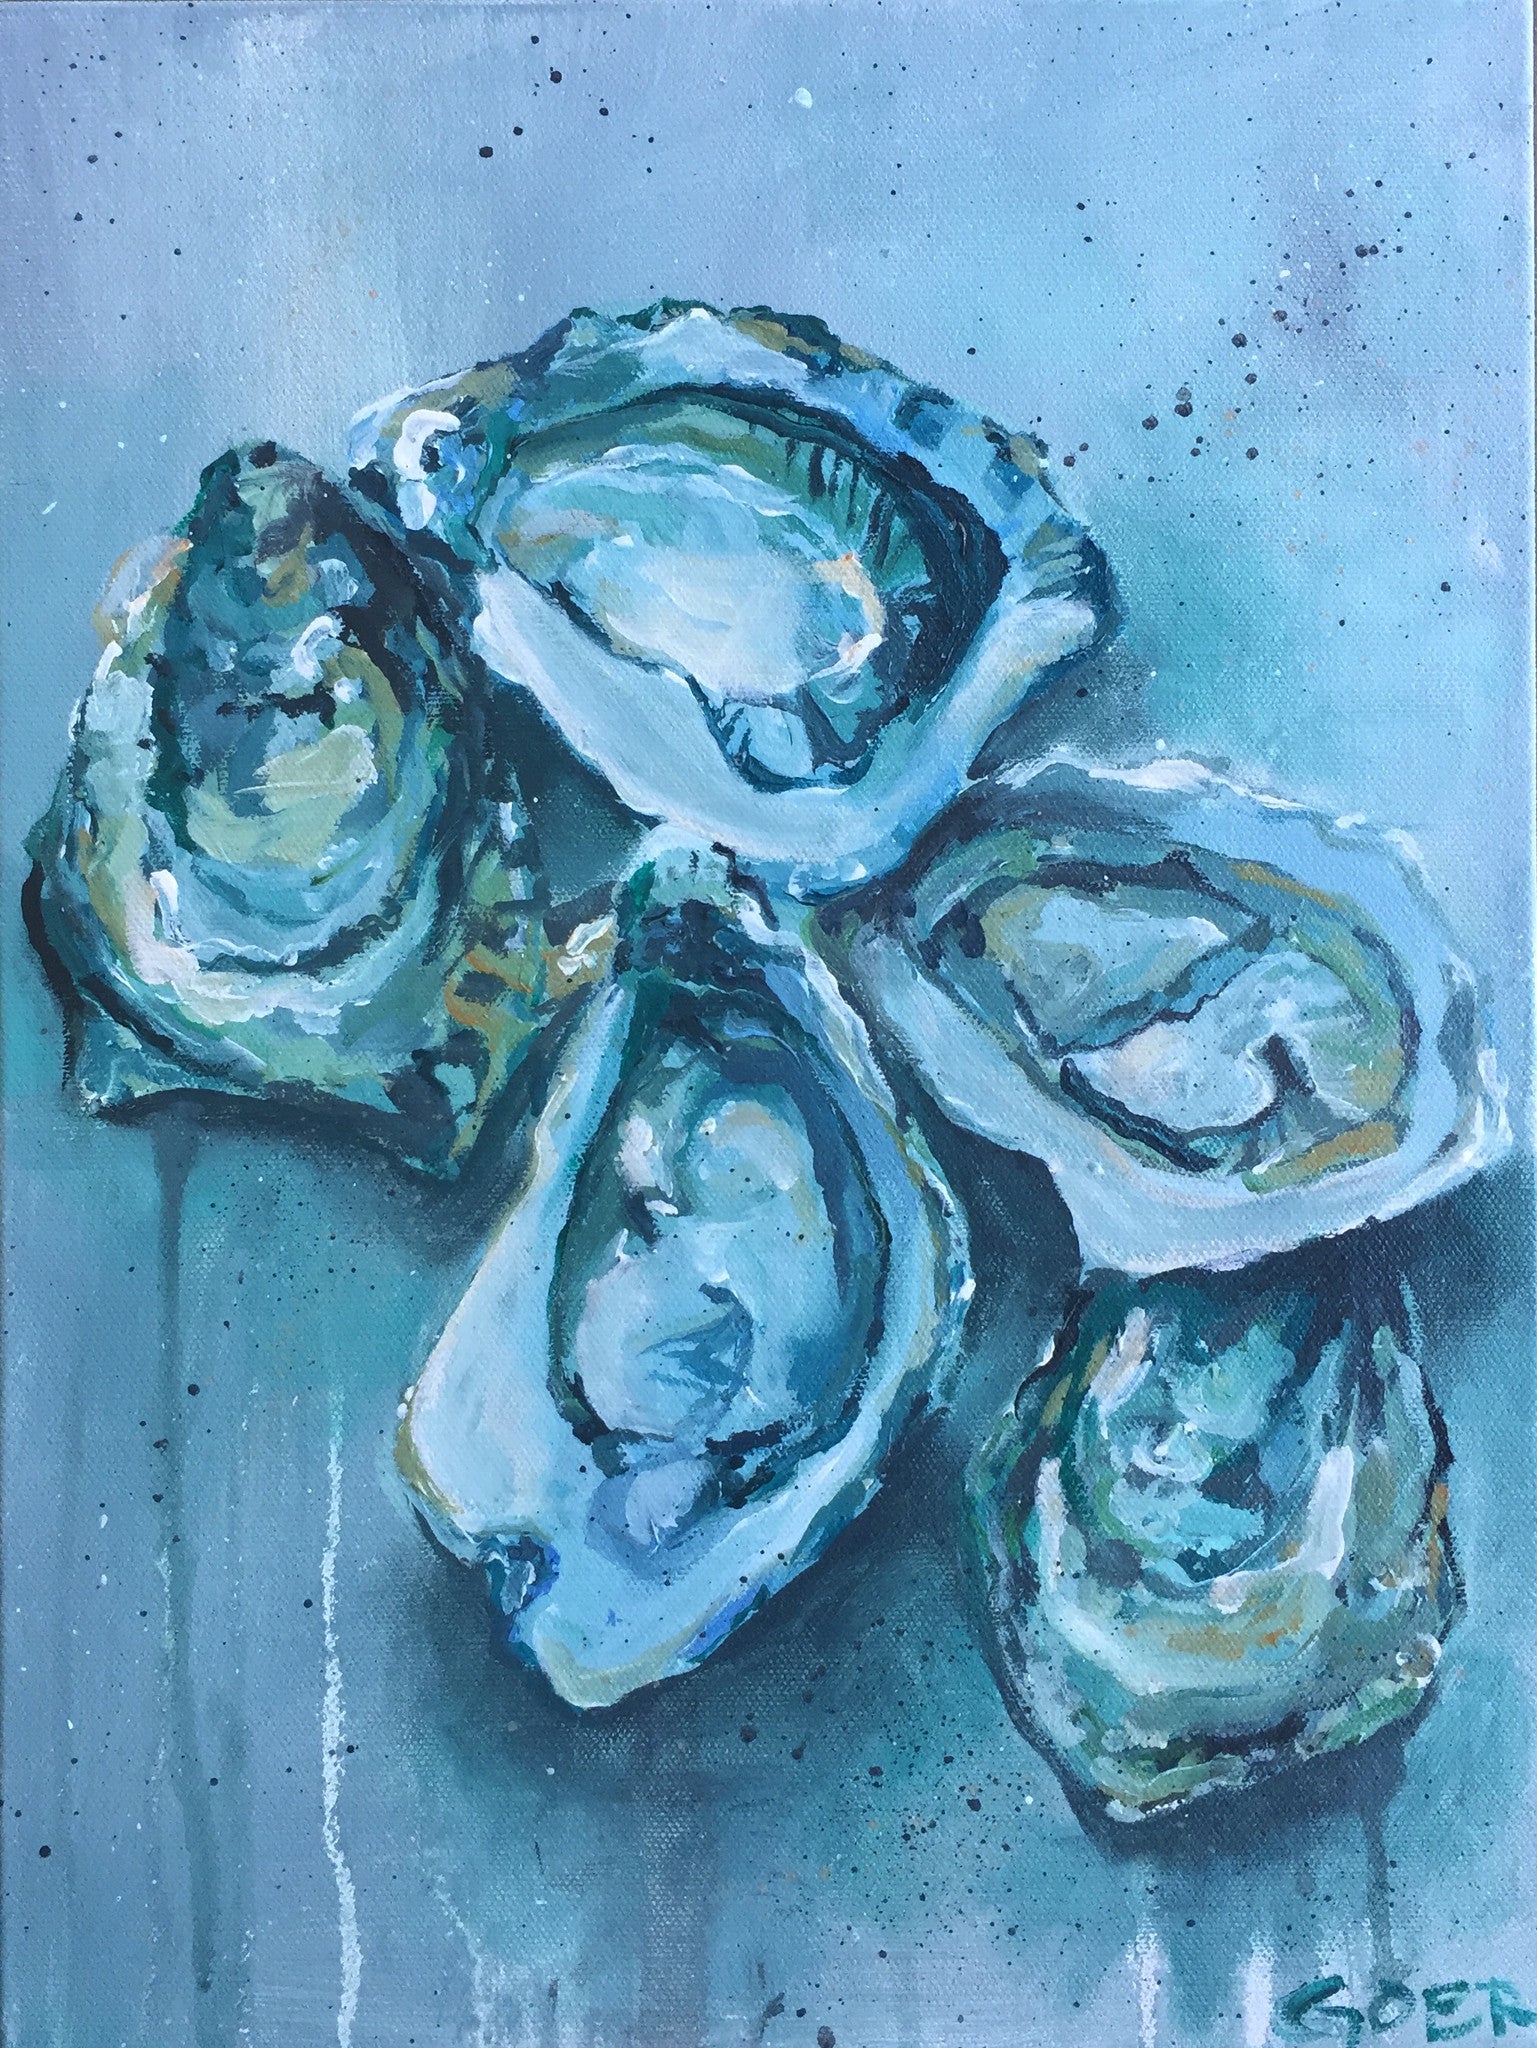 Oysters in Mist